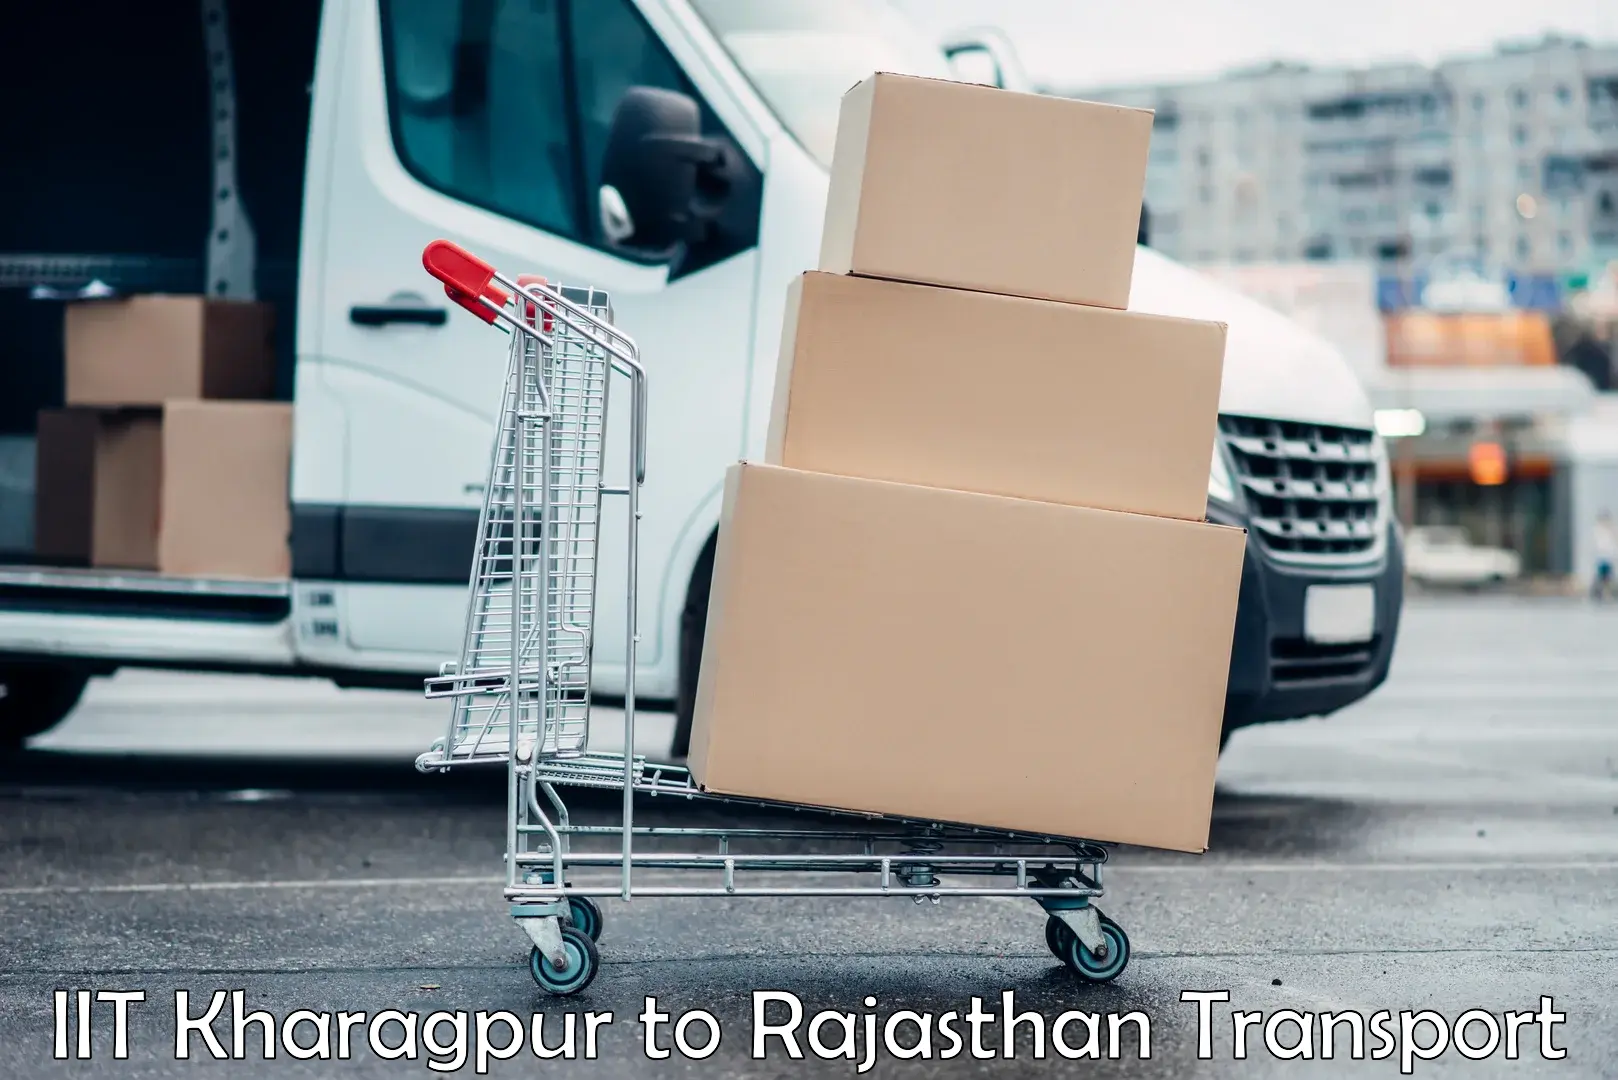 Goods delivery service IIT Kharagpur to Parbatsar